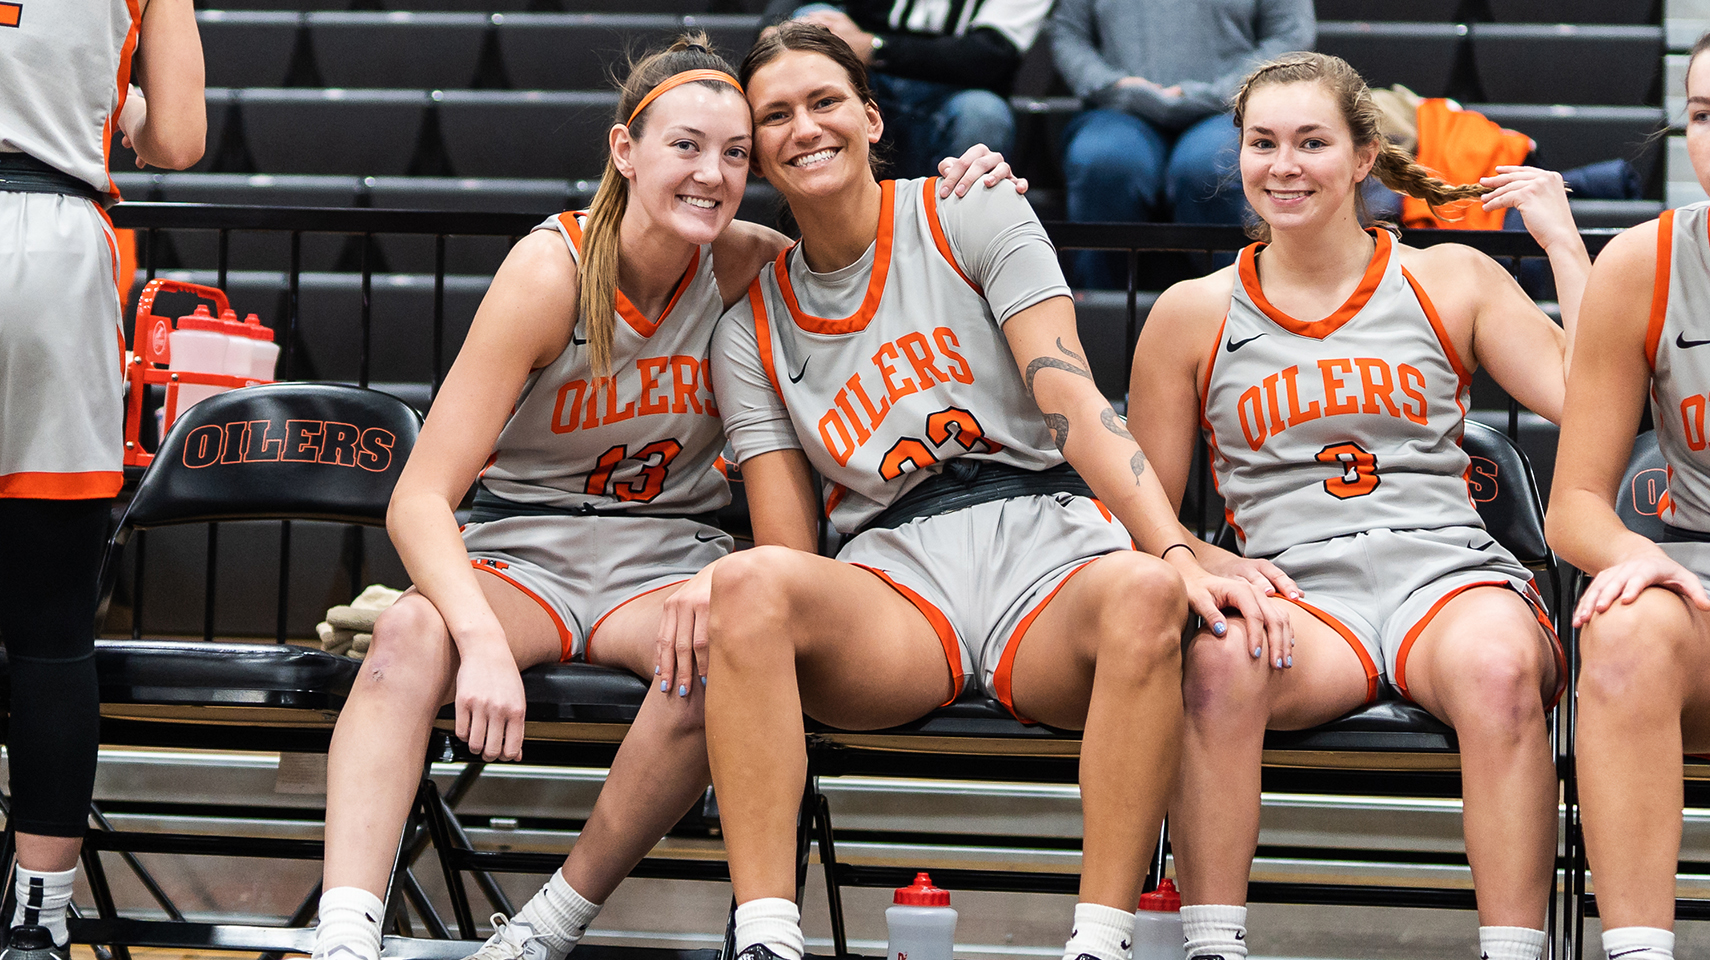 Women's basketball players hugging and smiling on the bench